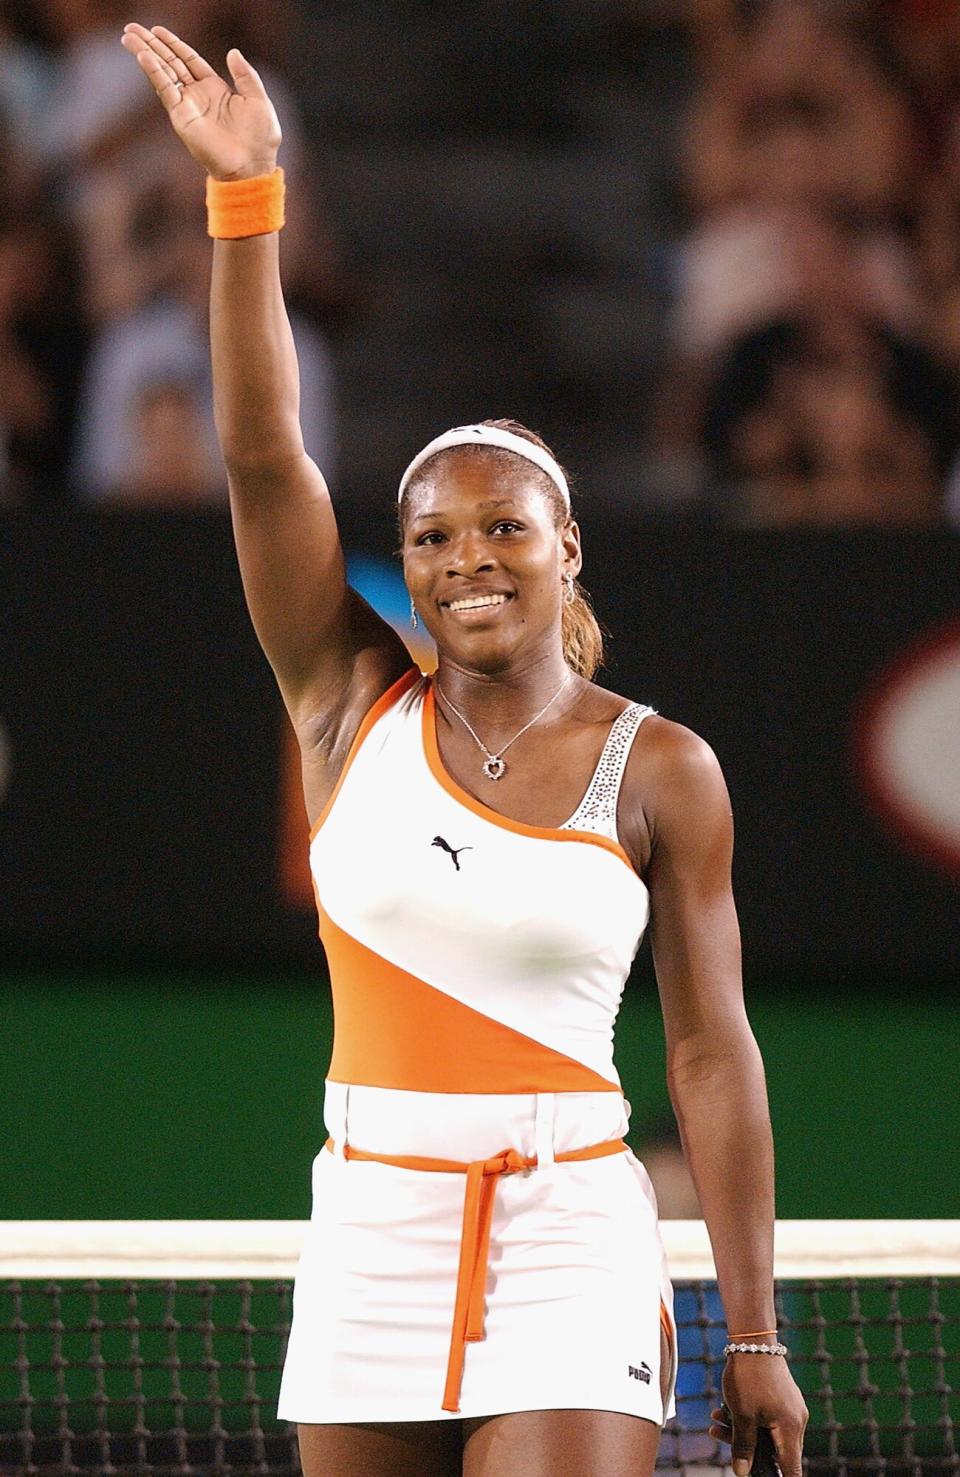 Serena Williams of the USA celebrates her victory over her sister Venus Williams of the USA during the Women's Singles final during the Australian Open Tennis Championships at Melbourne Park, Melbourne, Australia on January 25, 2003